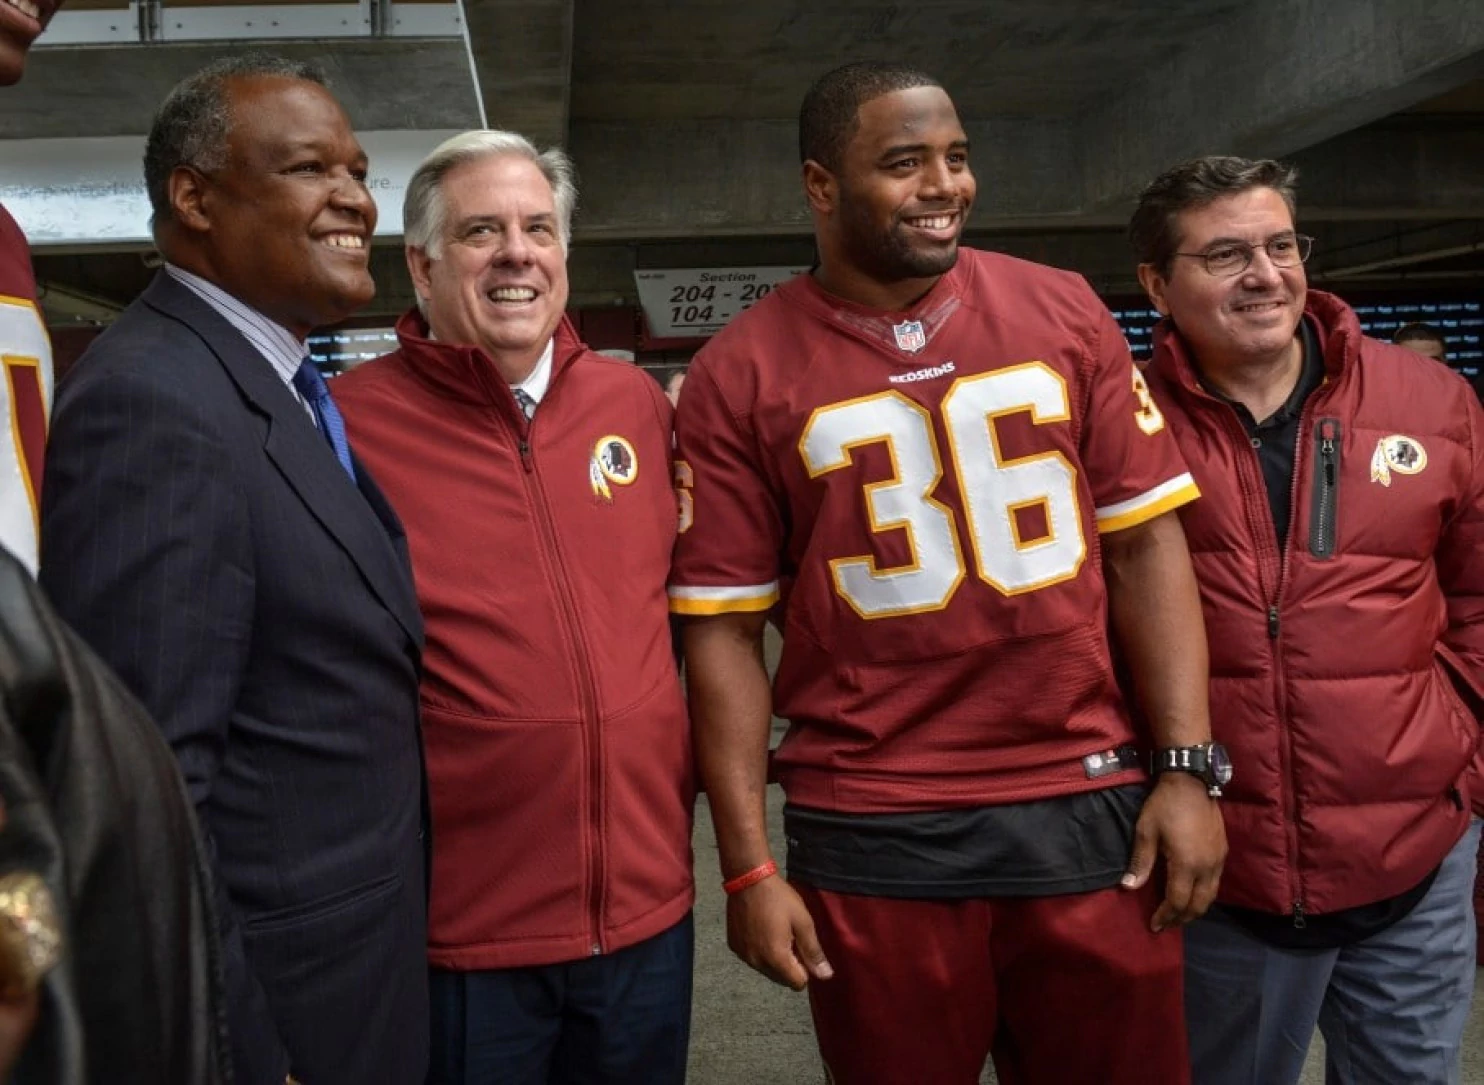 Darrell Young Darrel Young named Redskins39 Walter Payton Man of the Year